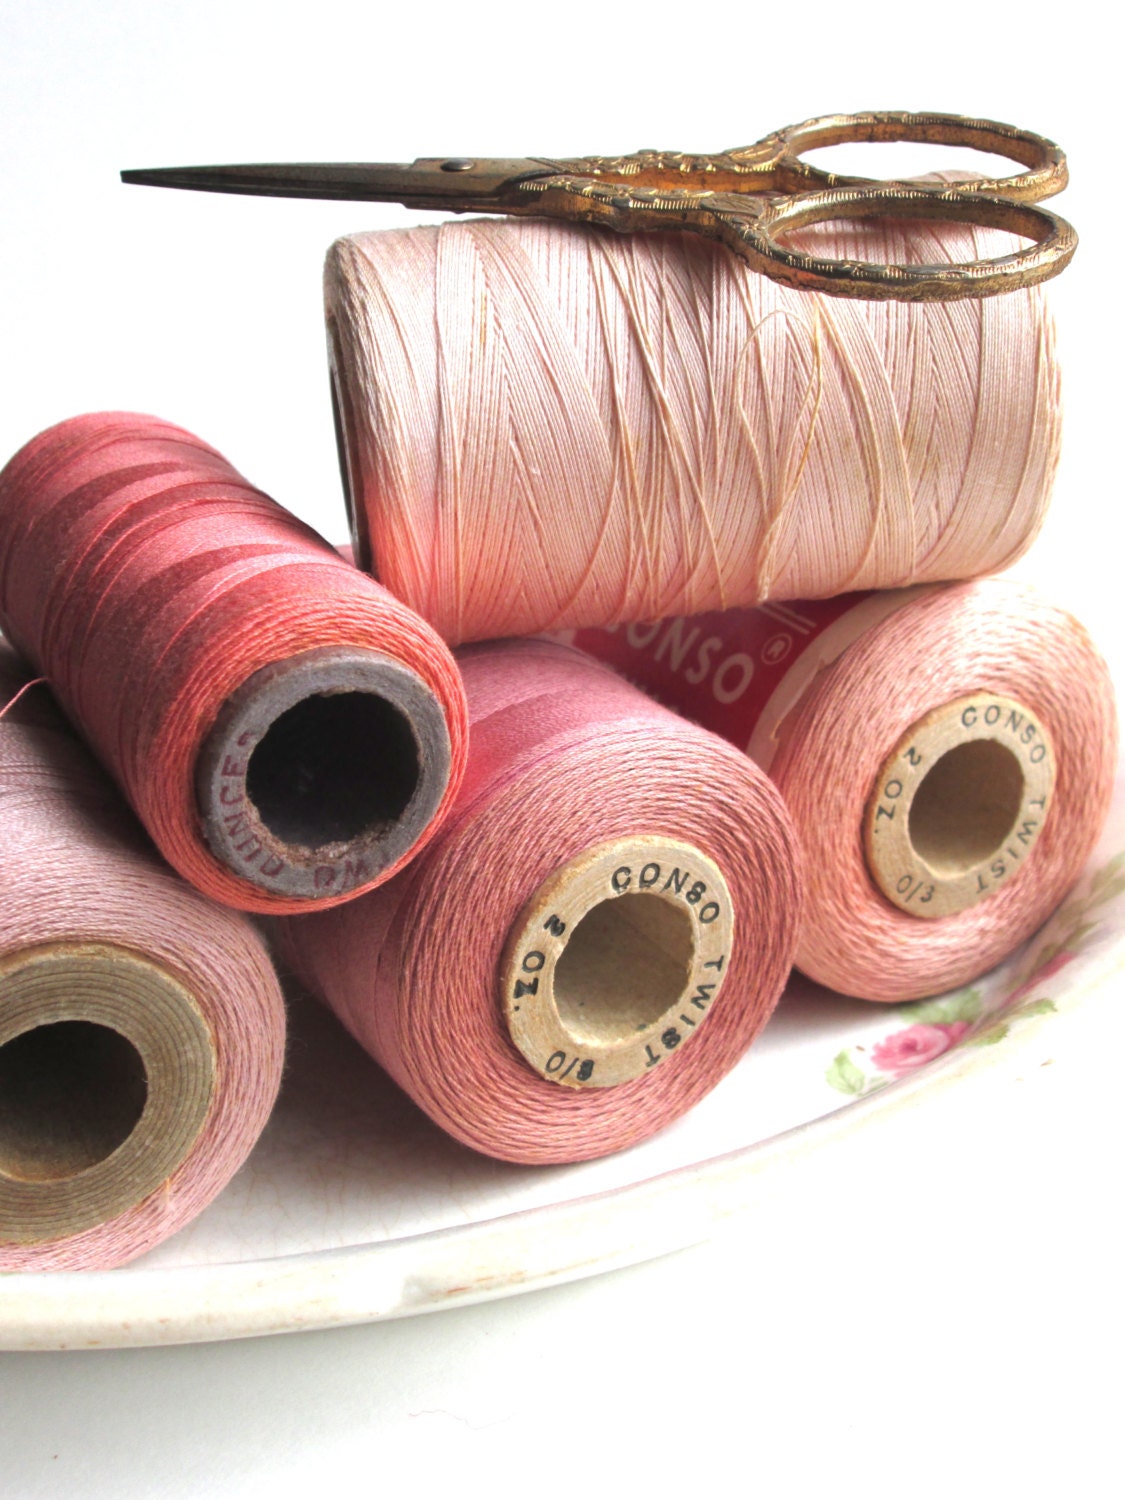 Pink Spool collection cotton thread vintage supply packaging home decor sewing craft supplies cottage shabby decor - LemonRoseStudio